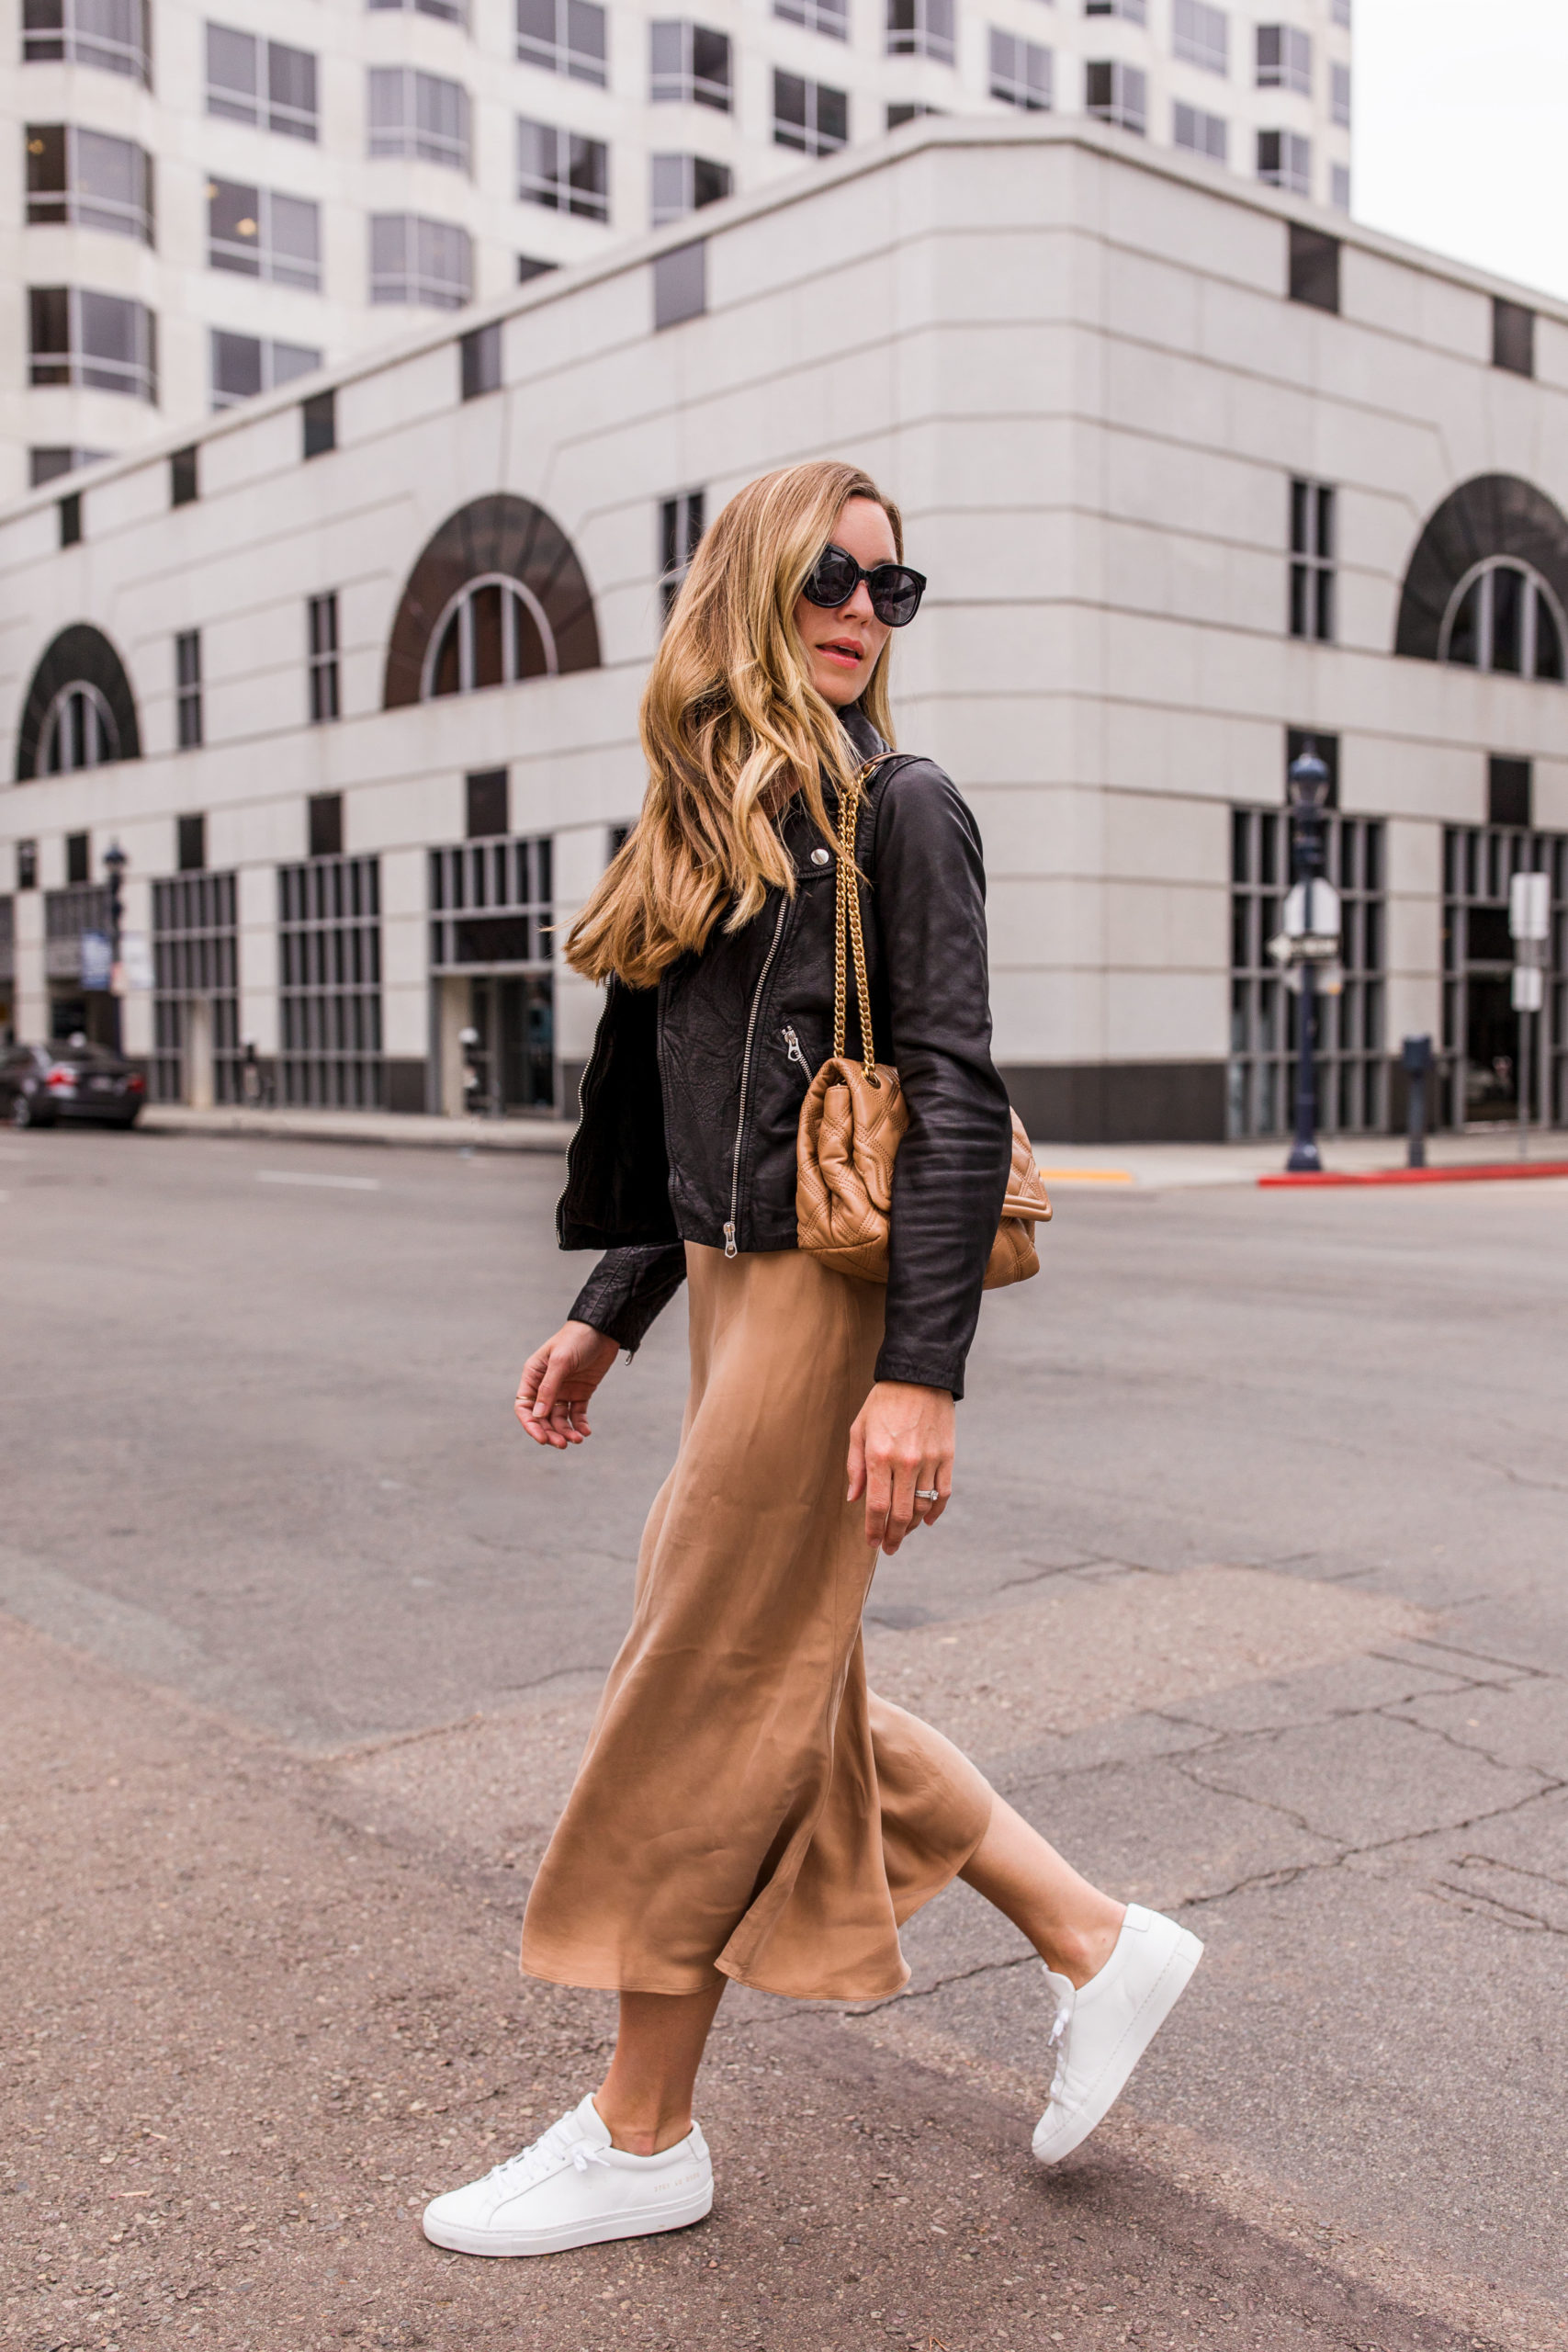 How to Style a Slip Dress